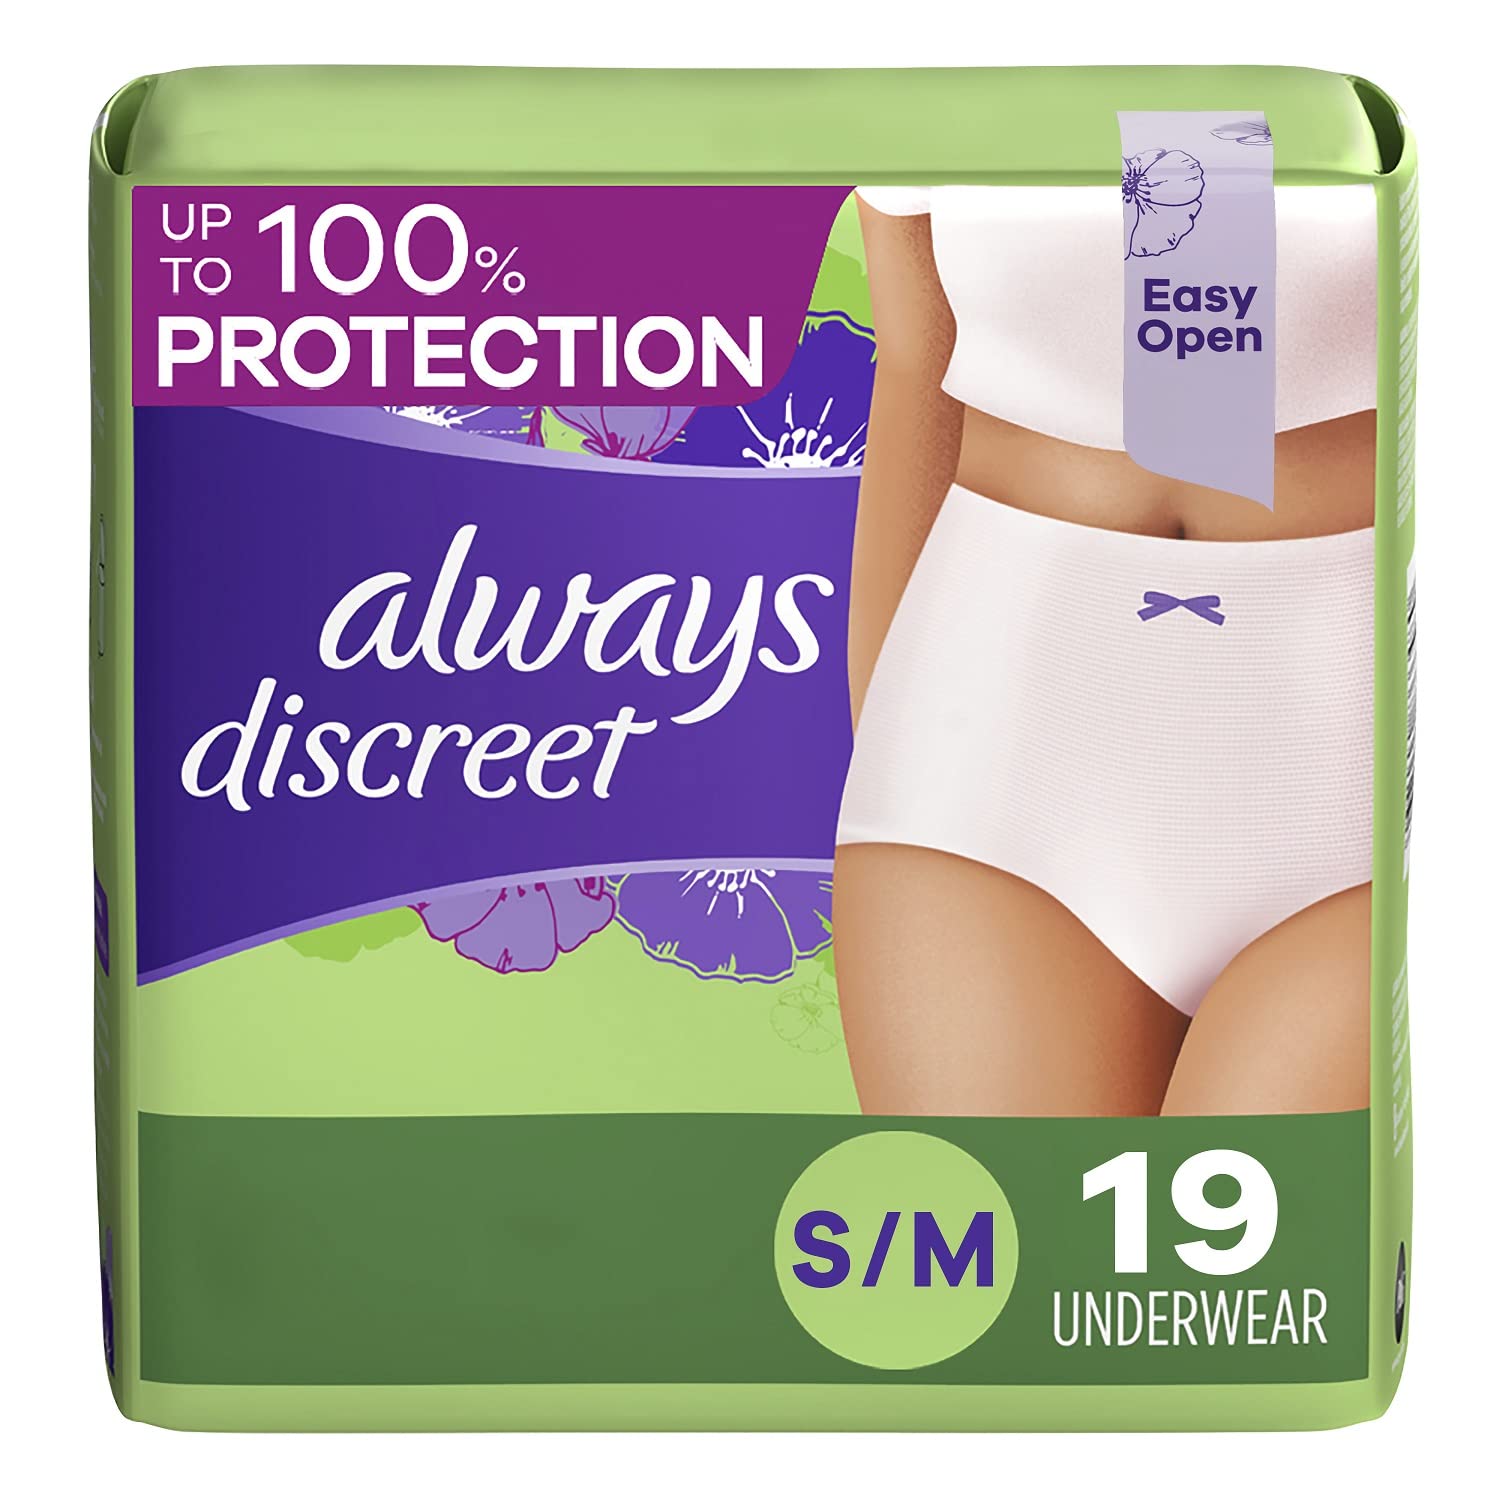 Depend FIT-FLEX Incontinence Underwear for Women, Disposable, Maximum  Absorbency, Large, Blush, 52 Count (2 Packs of 26) (Packaging May Vary)